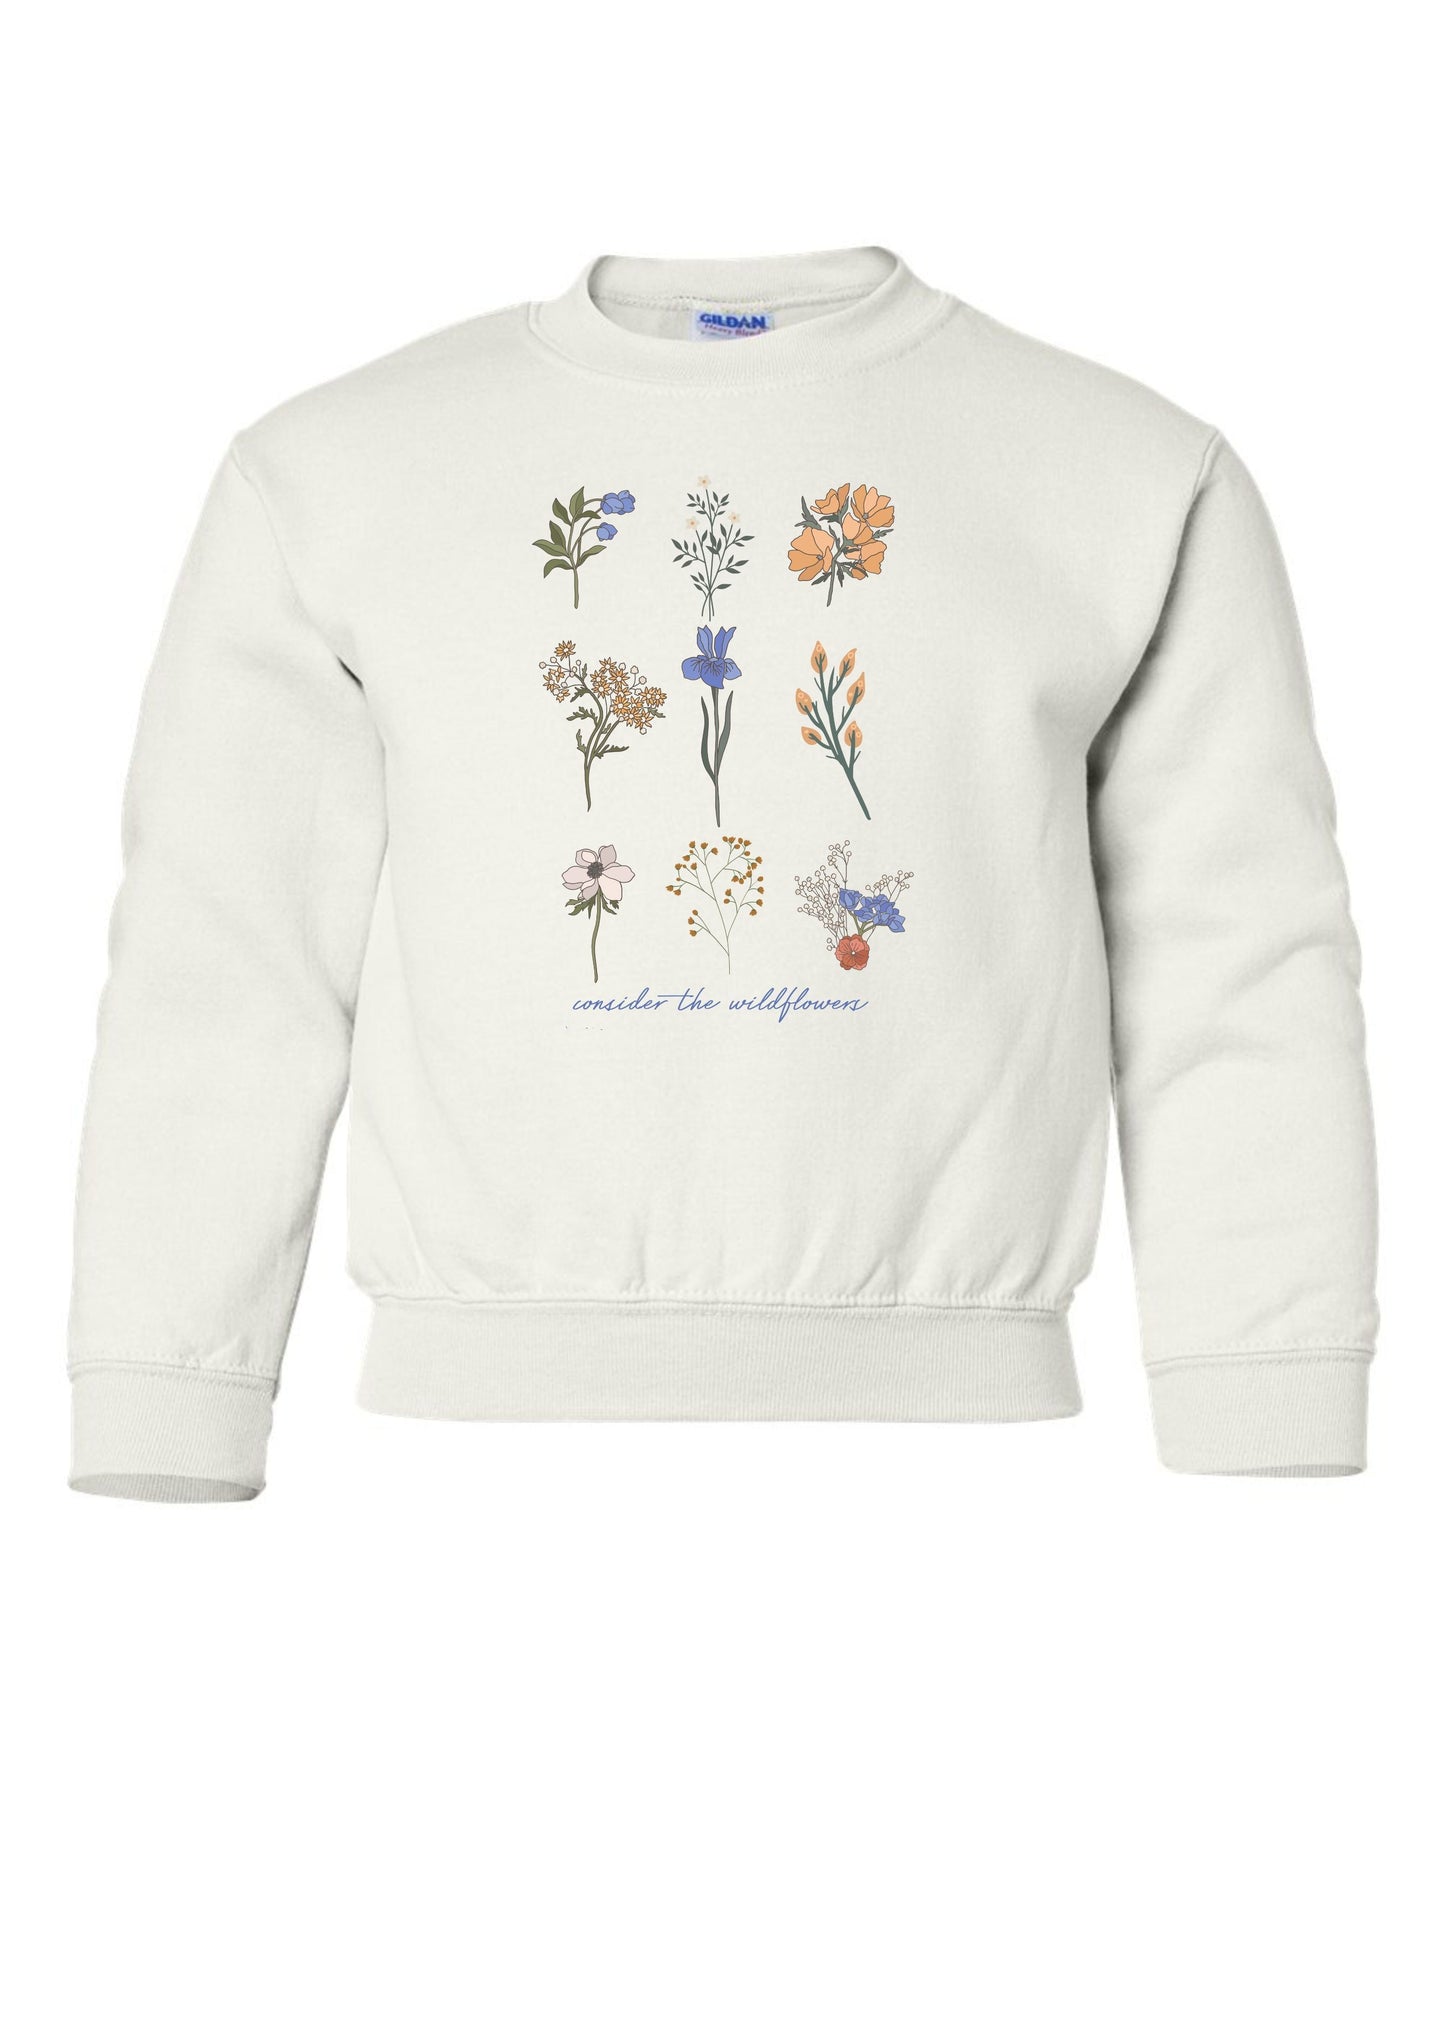 Consider The Wildflowers | Kids Crewneck-Kids Crewneck-Sister Shirts-Sister Shirts, Cute & Custom Tees for Mama & Littles in Trussville, Alabama.